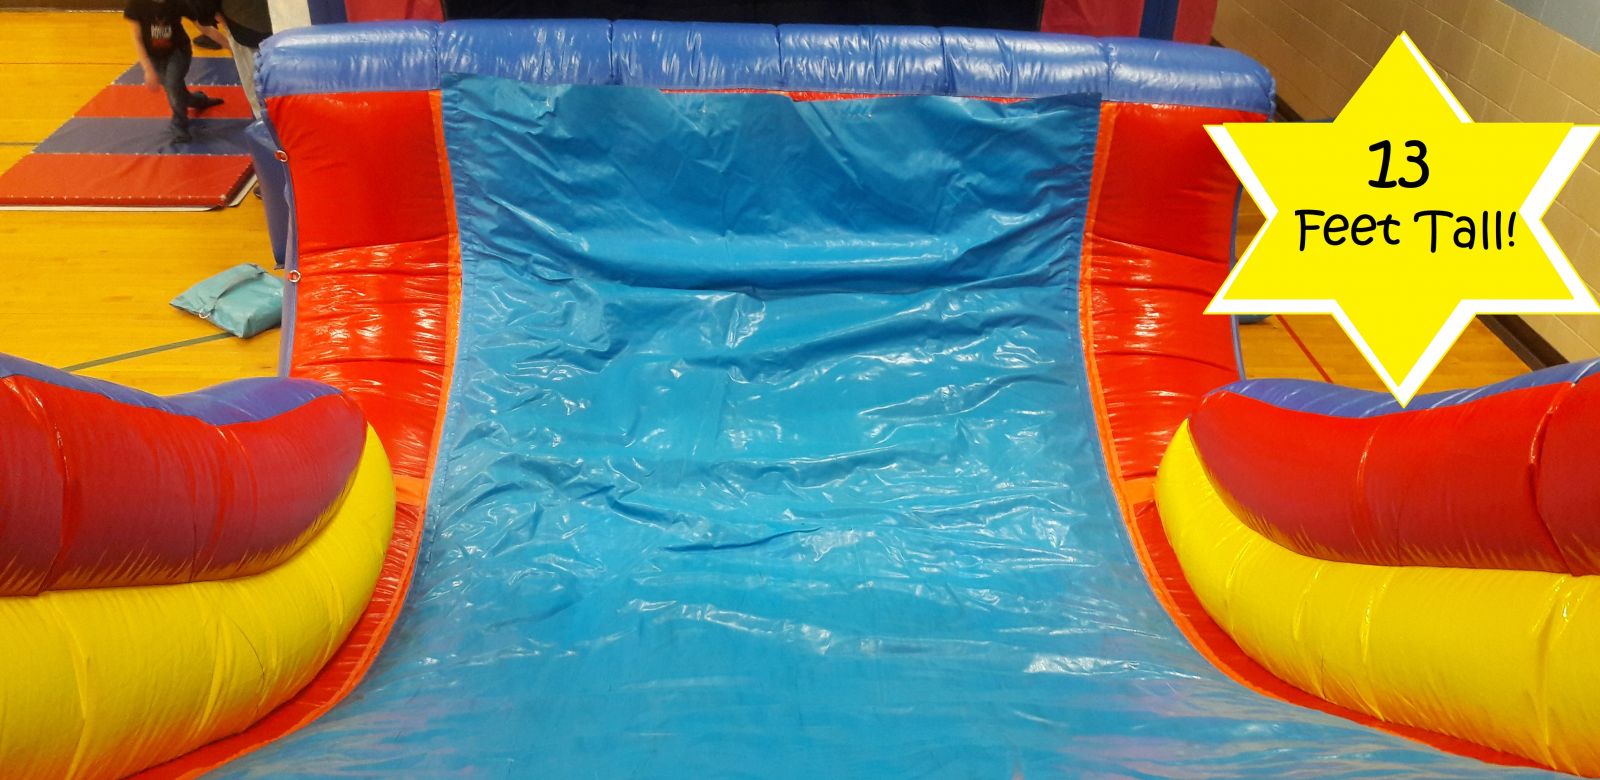 Slide view from the top of the climbing wall on the inflatable obstacle course